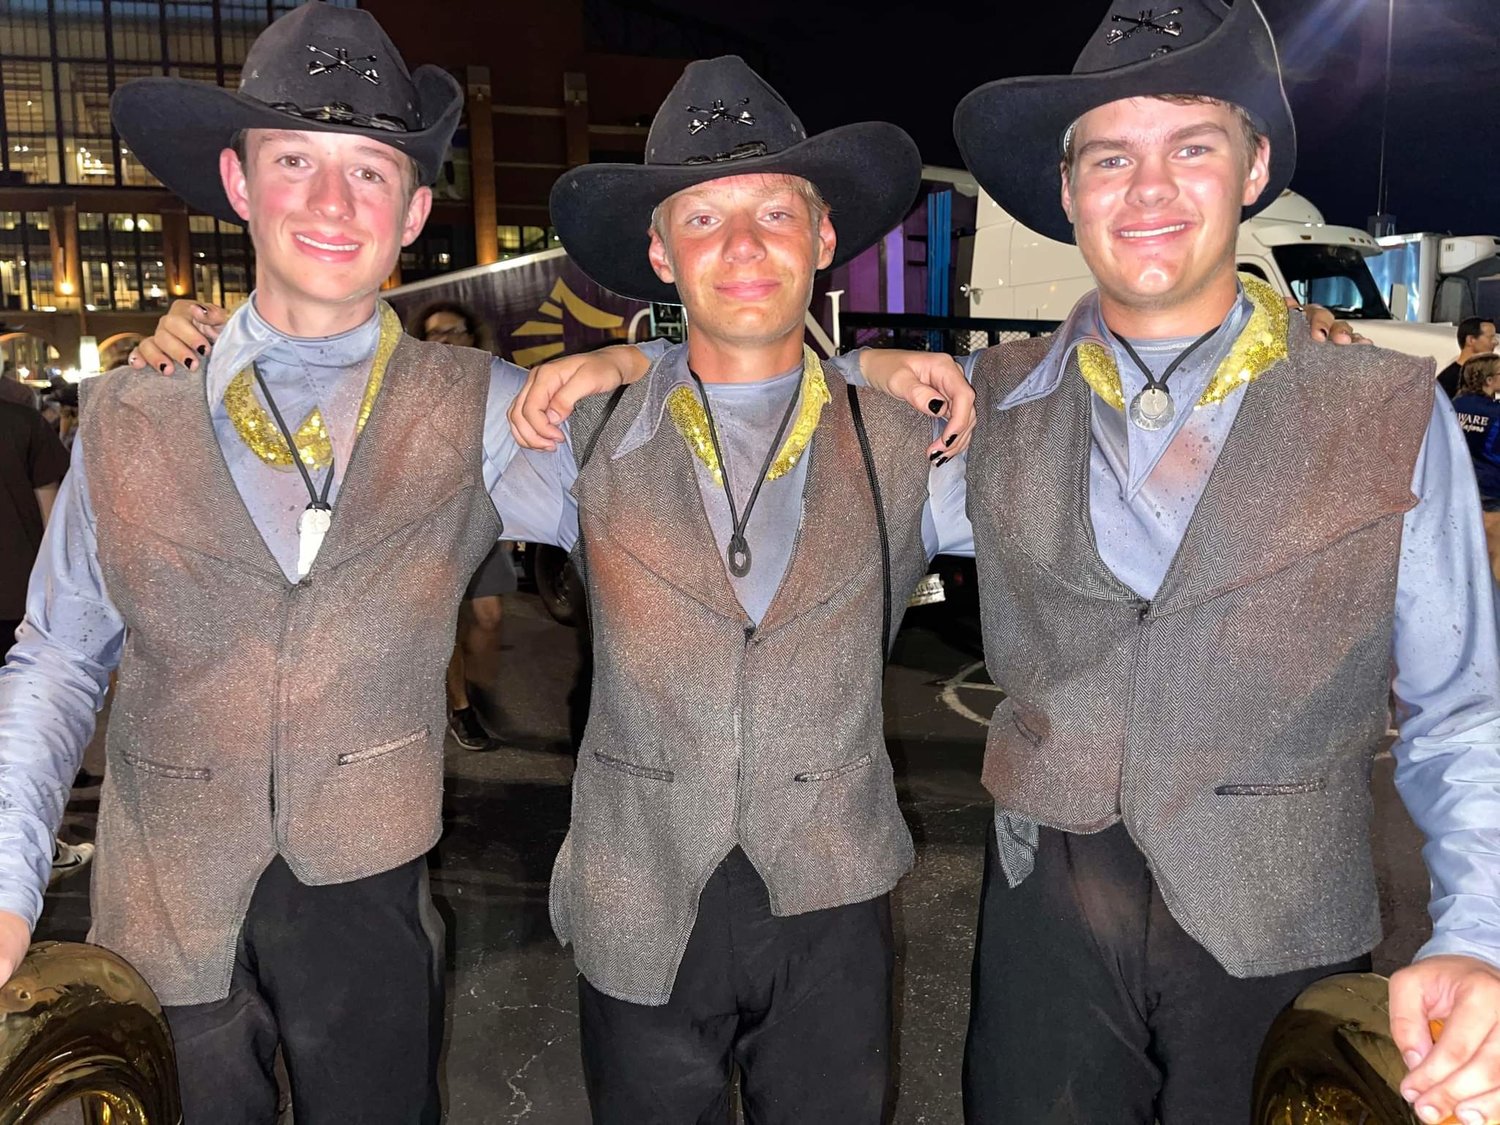 Avery Byers (center) stands with two of his fellow musical companions after a show. Avery will cherish the many memories and friends he made during the 2022 summer, “ …It is like family. You have lived with these people for two and a half months. You sweated and cried with them most of the time. You have literally done everything (together) for those two and a half months straight. It is kind of hard going back home and leaving that all behind.”